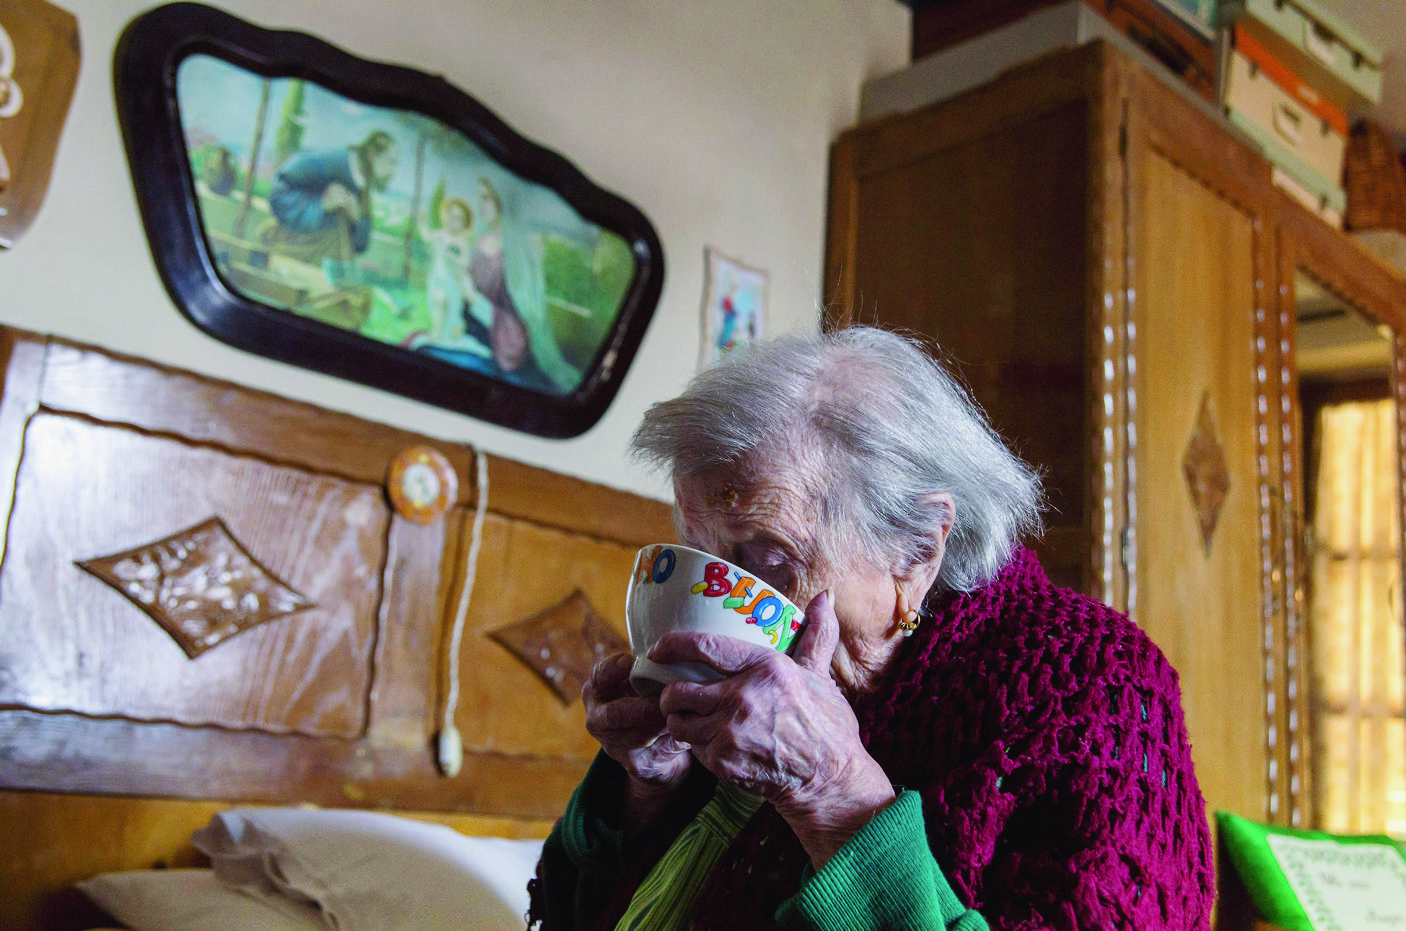 Emma Martina Luigia Morano (born 29 November 1899) is an Italian supercentenarian who is, at the age of 116 years, 193 days, the world's oldest living person, and the last verified living person to have been born in the 1800s, pictured in her appartment in Pallanza, Italy, Friday, June 10, 2016. (KEYSTONE/TI-Press/Francesca Agosta) ITALIEN AELTESTE FRAU